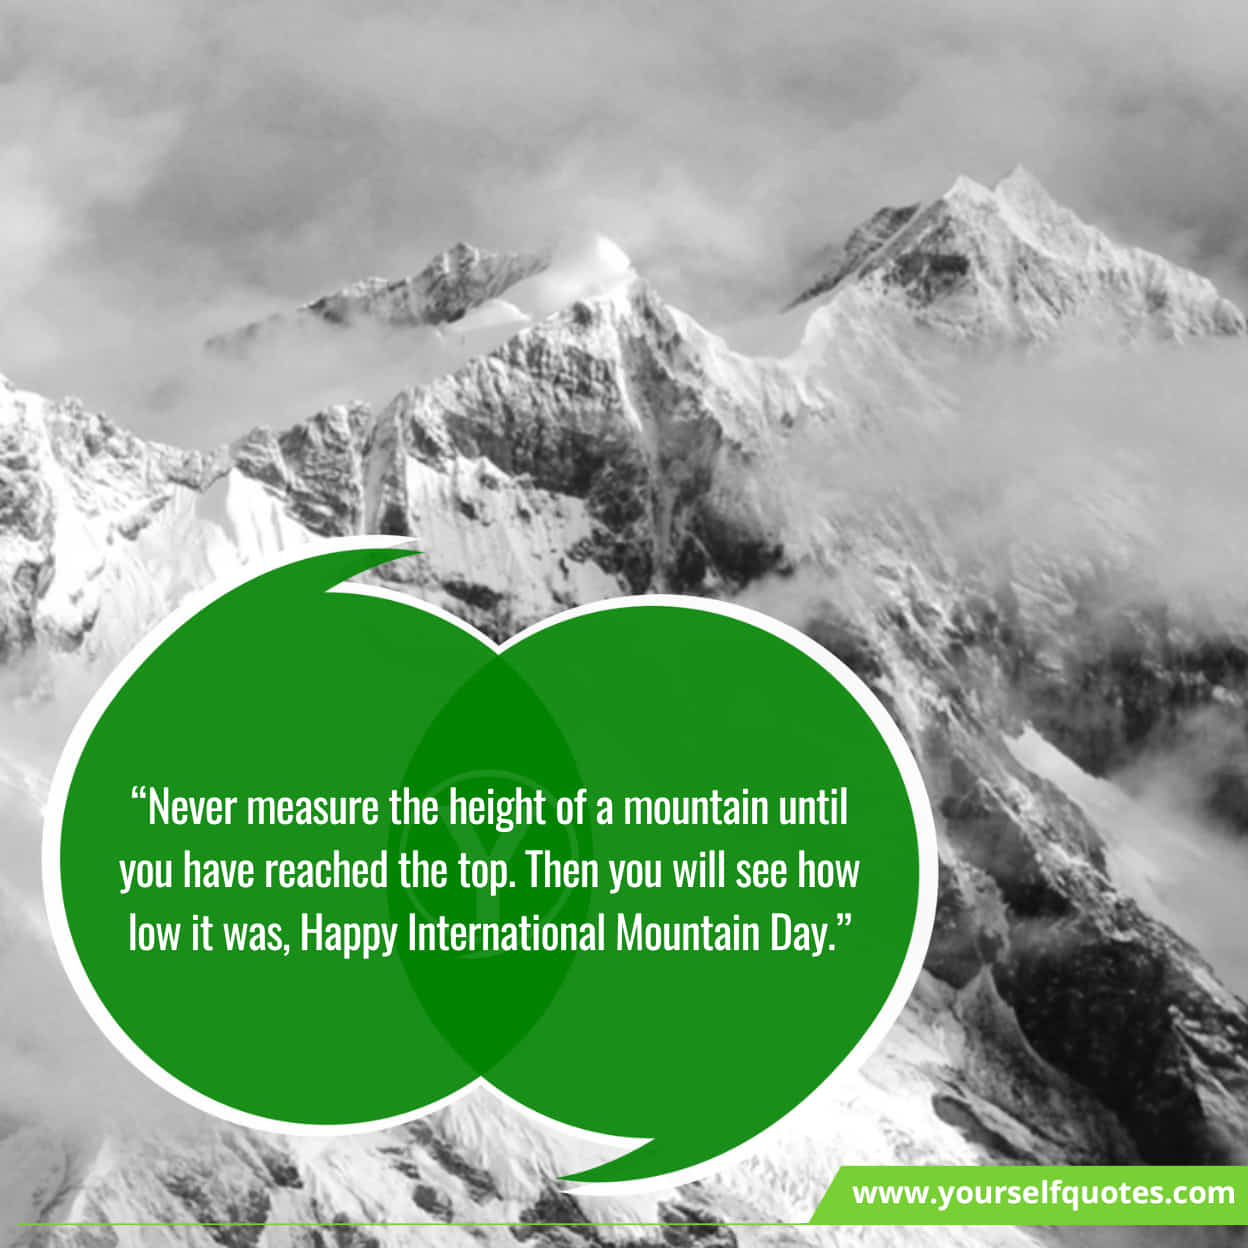 Best Inspirational Wishes For International Mountain Day 